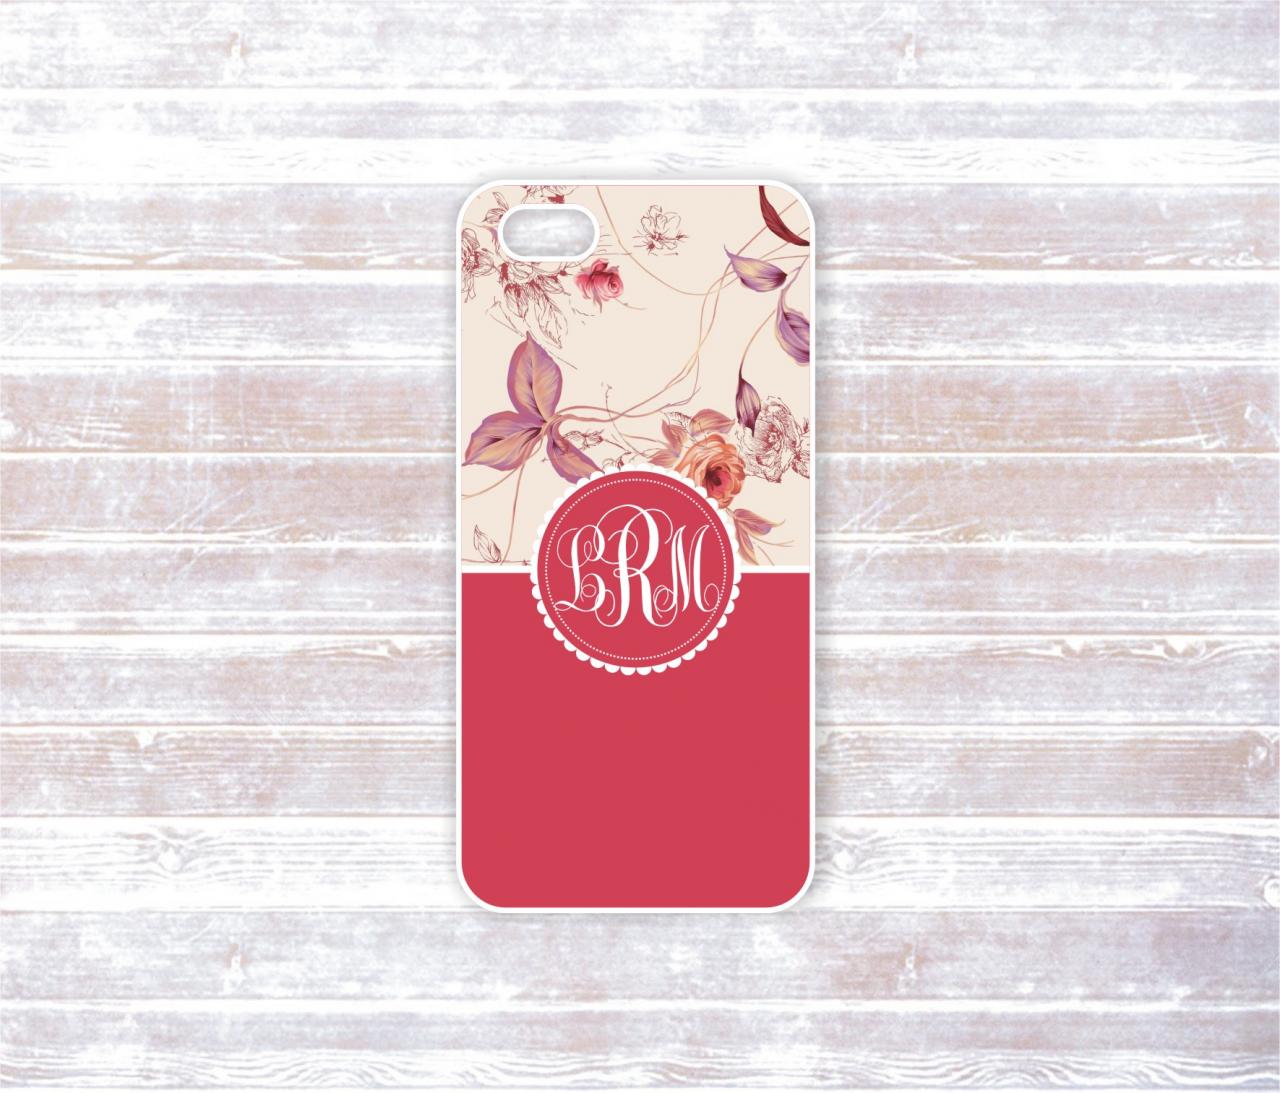 Monogrammed Iphone 5 Case - Indian Red And Cream Color With White Monogram - Damask - Personalized Hard Cover For Iphone 5